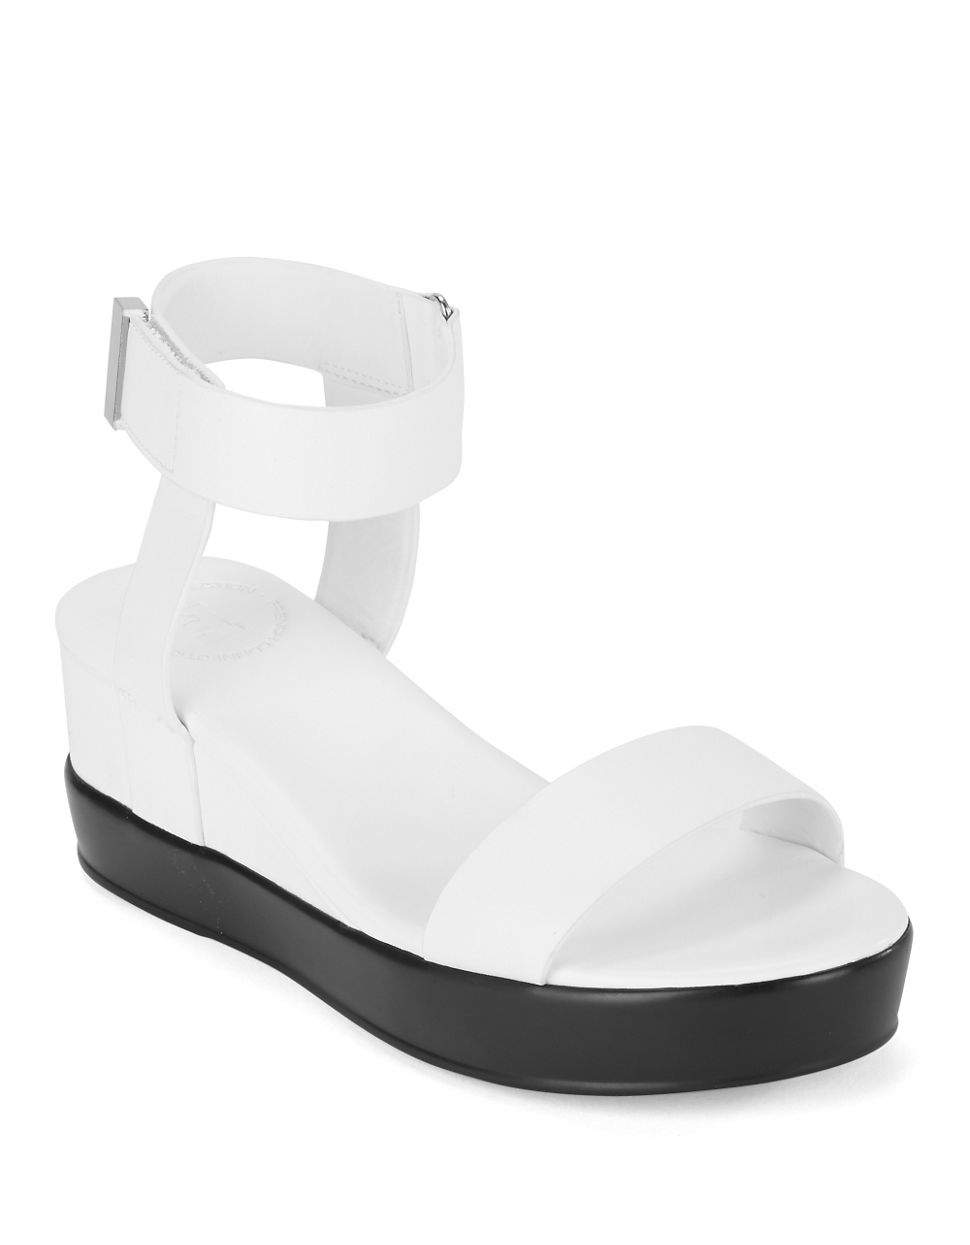 French connection  Petja Leather Wedge Platform Sandals  in 